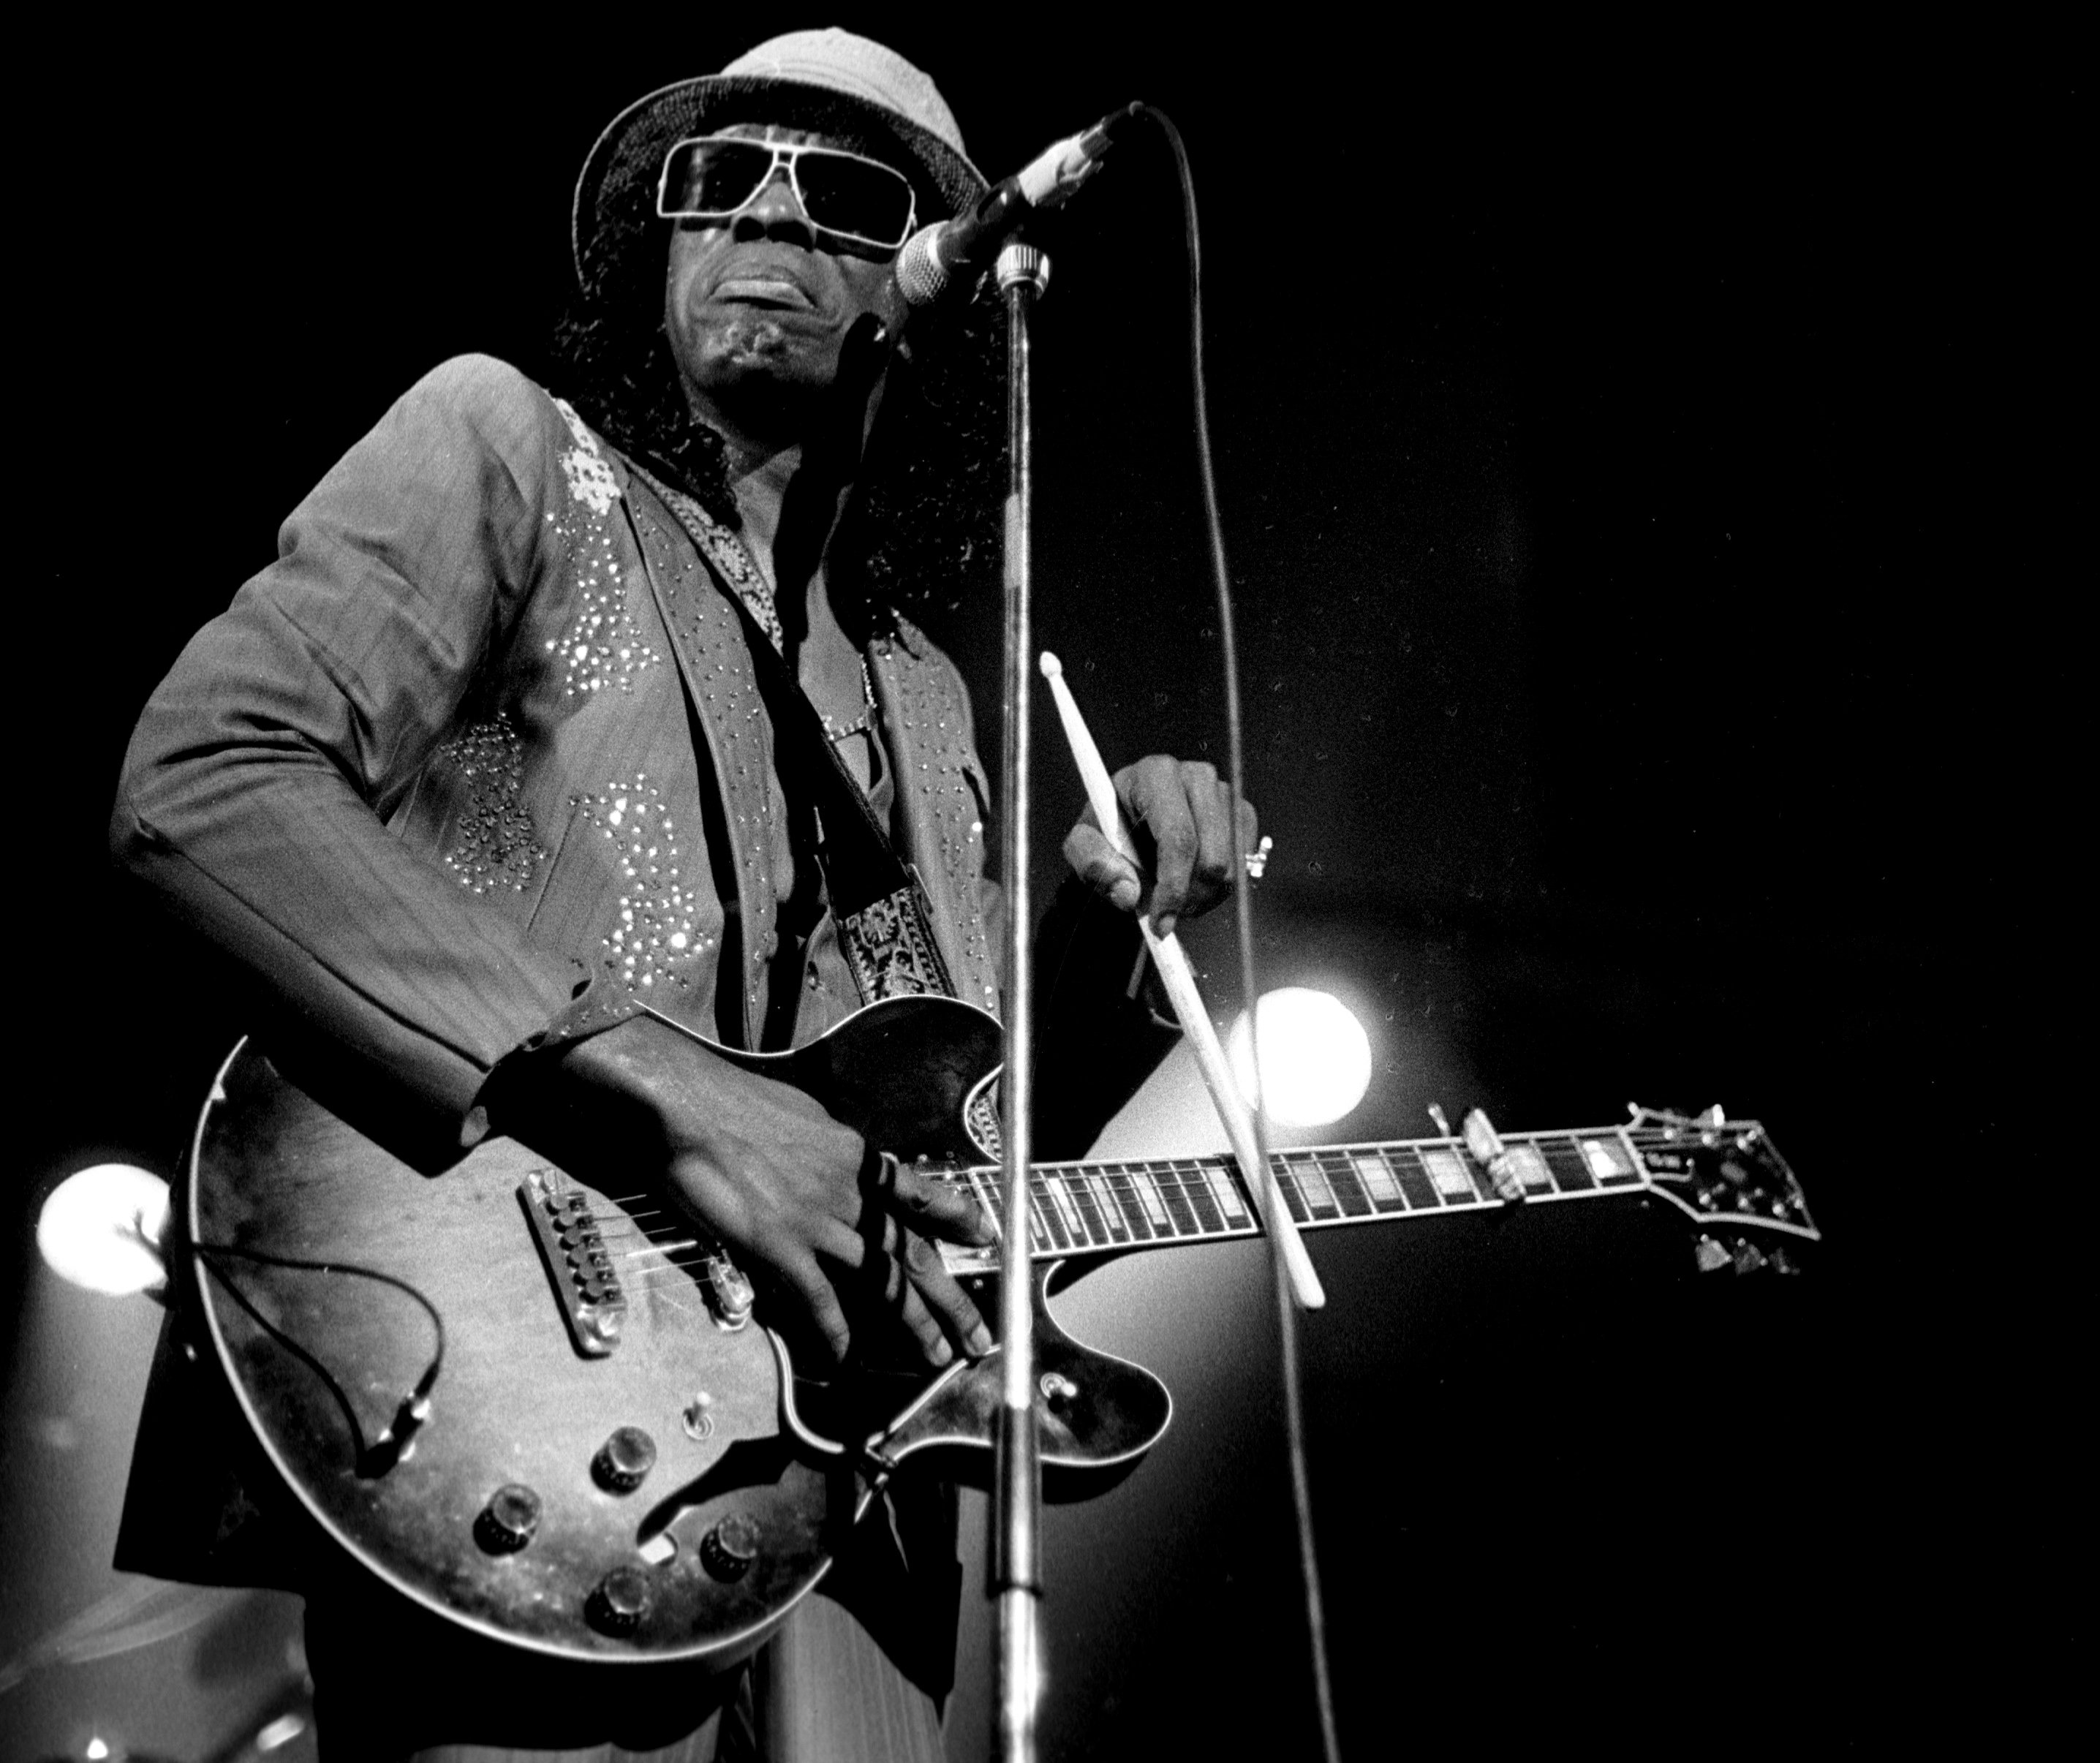 Johnny "Guitar" Watson" in Paradiso, Amsterdam on May 21, 1987 | Source: Getty Images